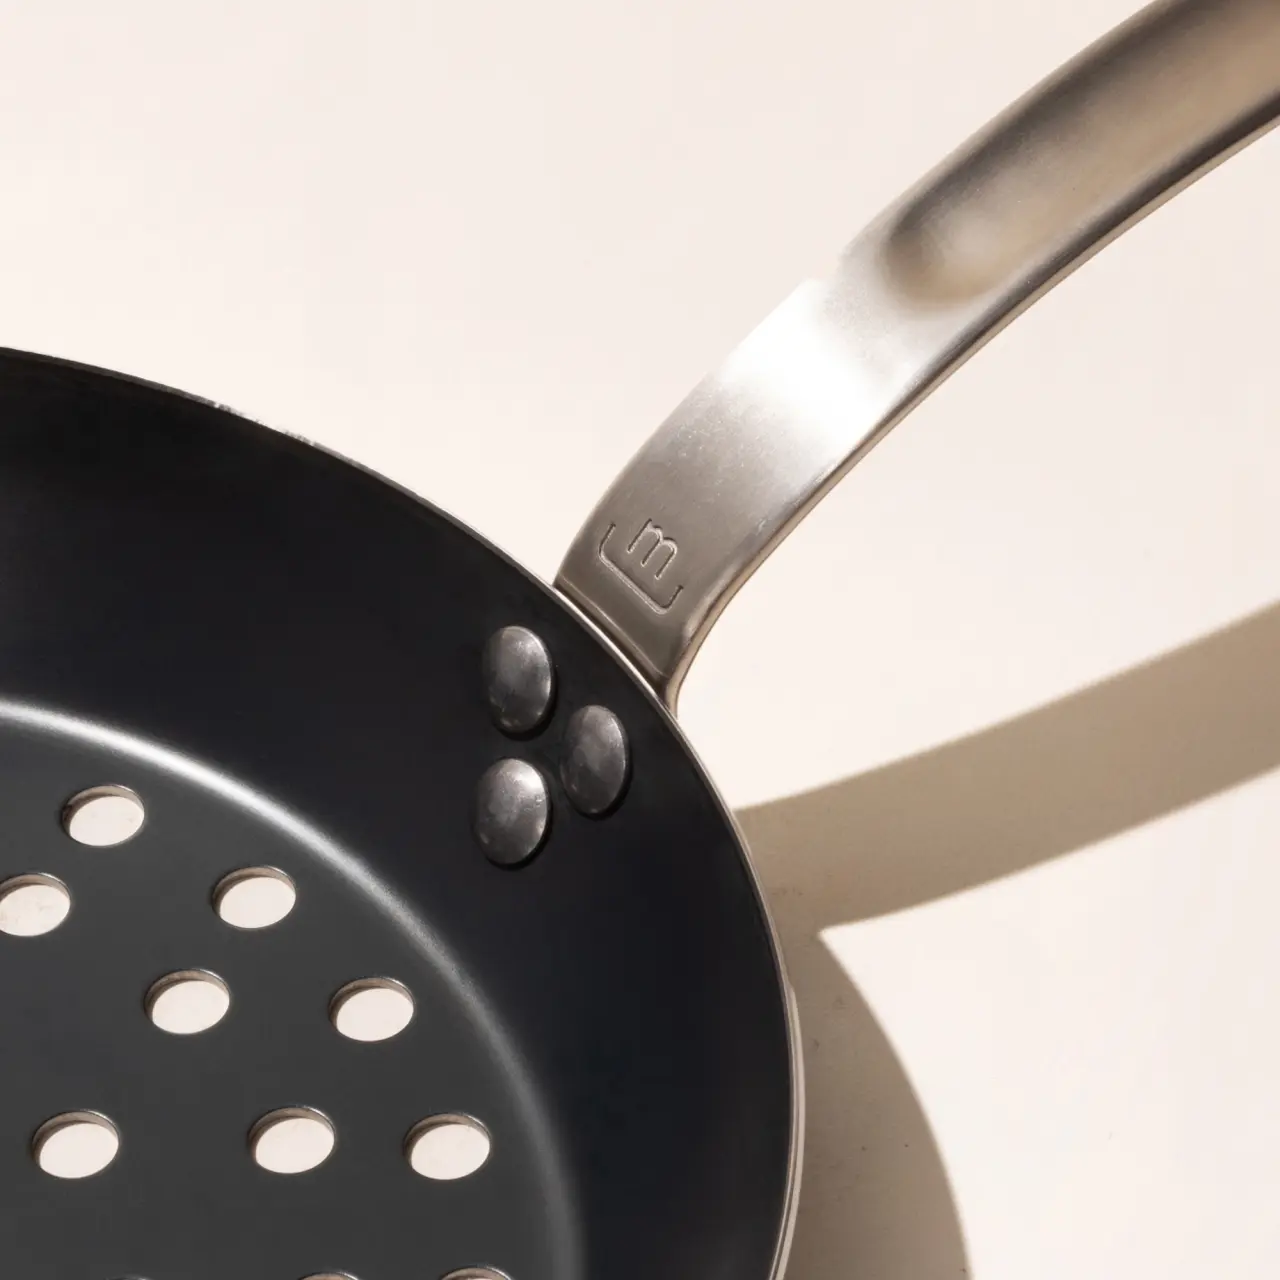 A stainless steel spatula with round cutouts rests on a non-stick frying pan with three small round objects that resemble chocolate candies on its surface, creating a minimalist composition with cast shadows.